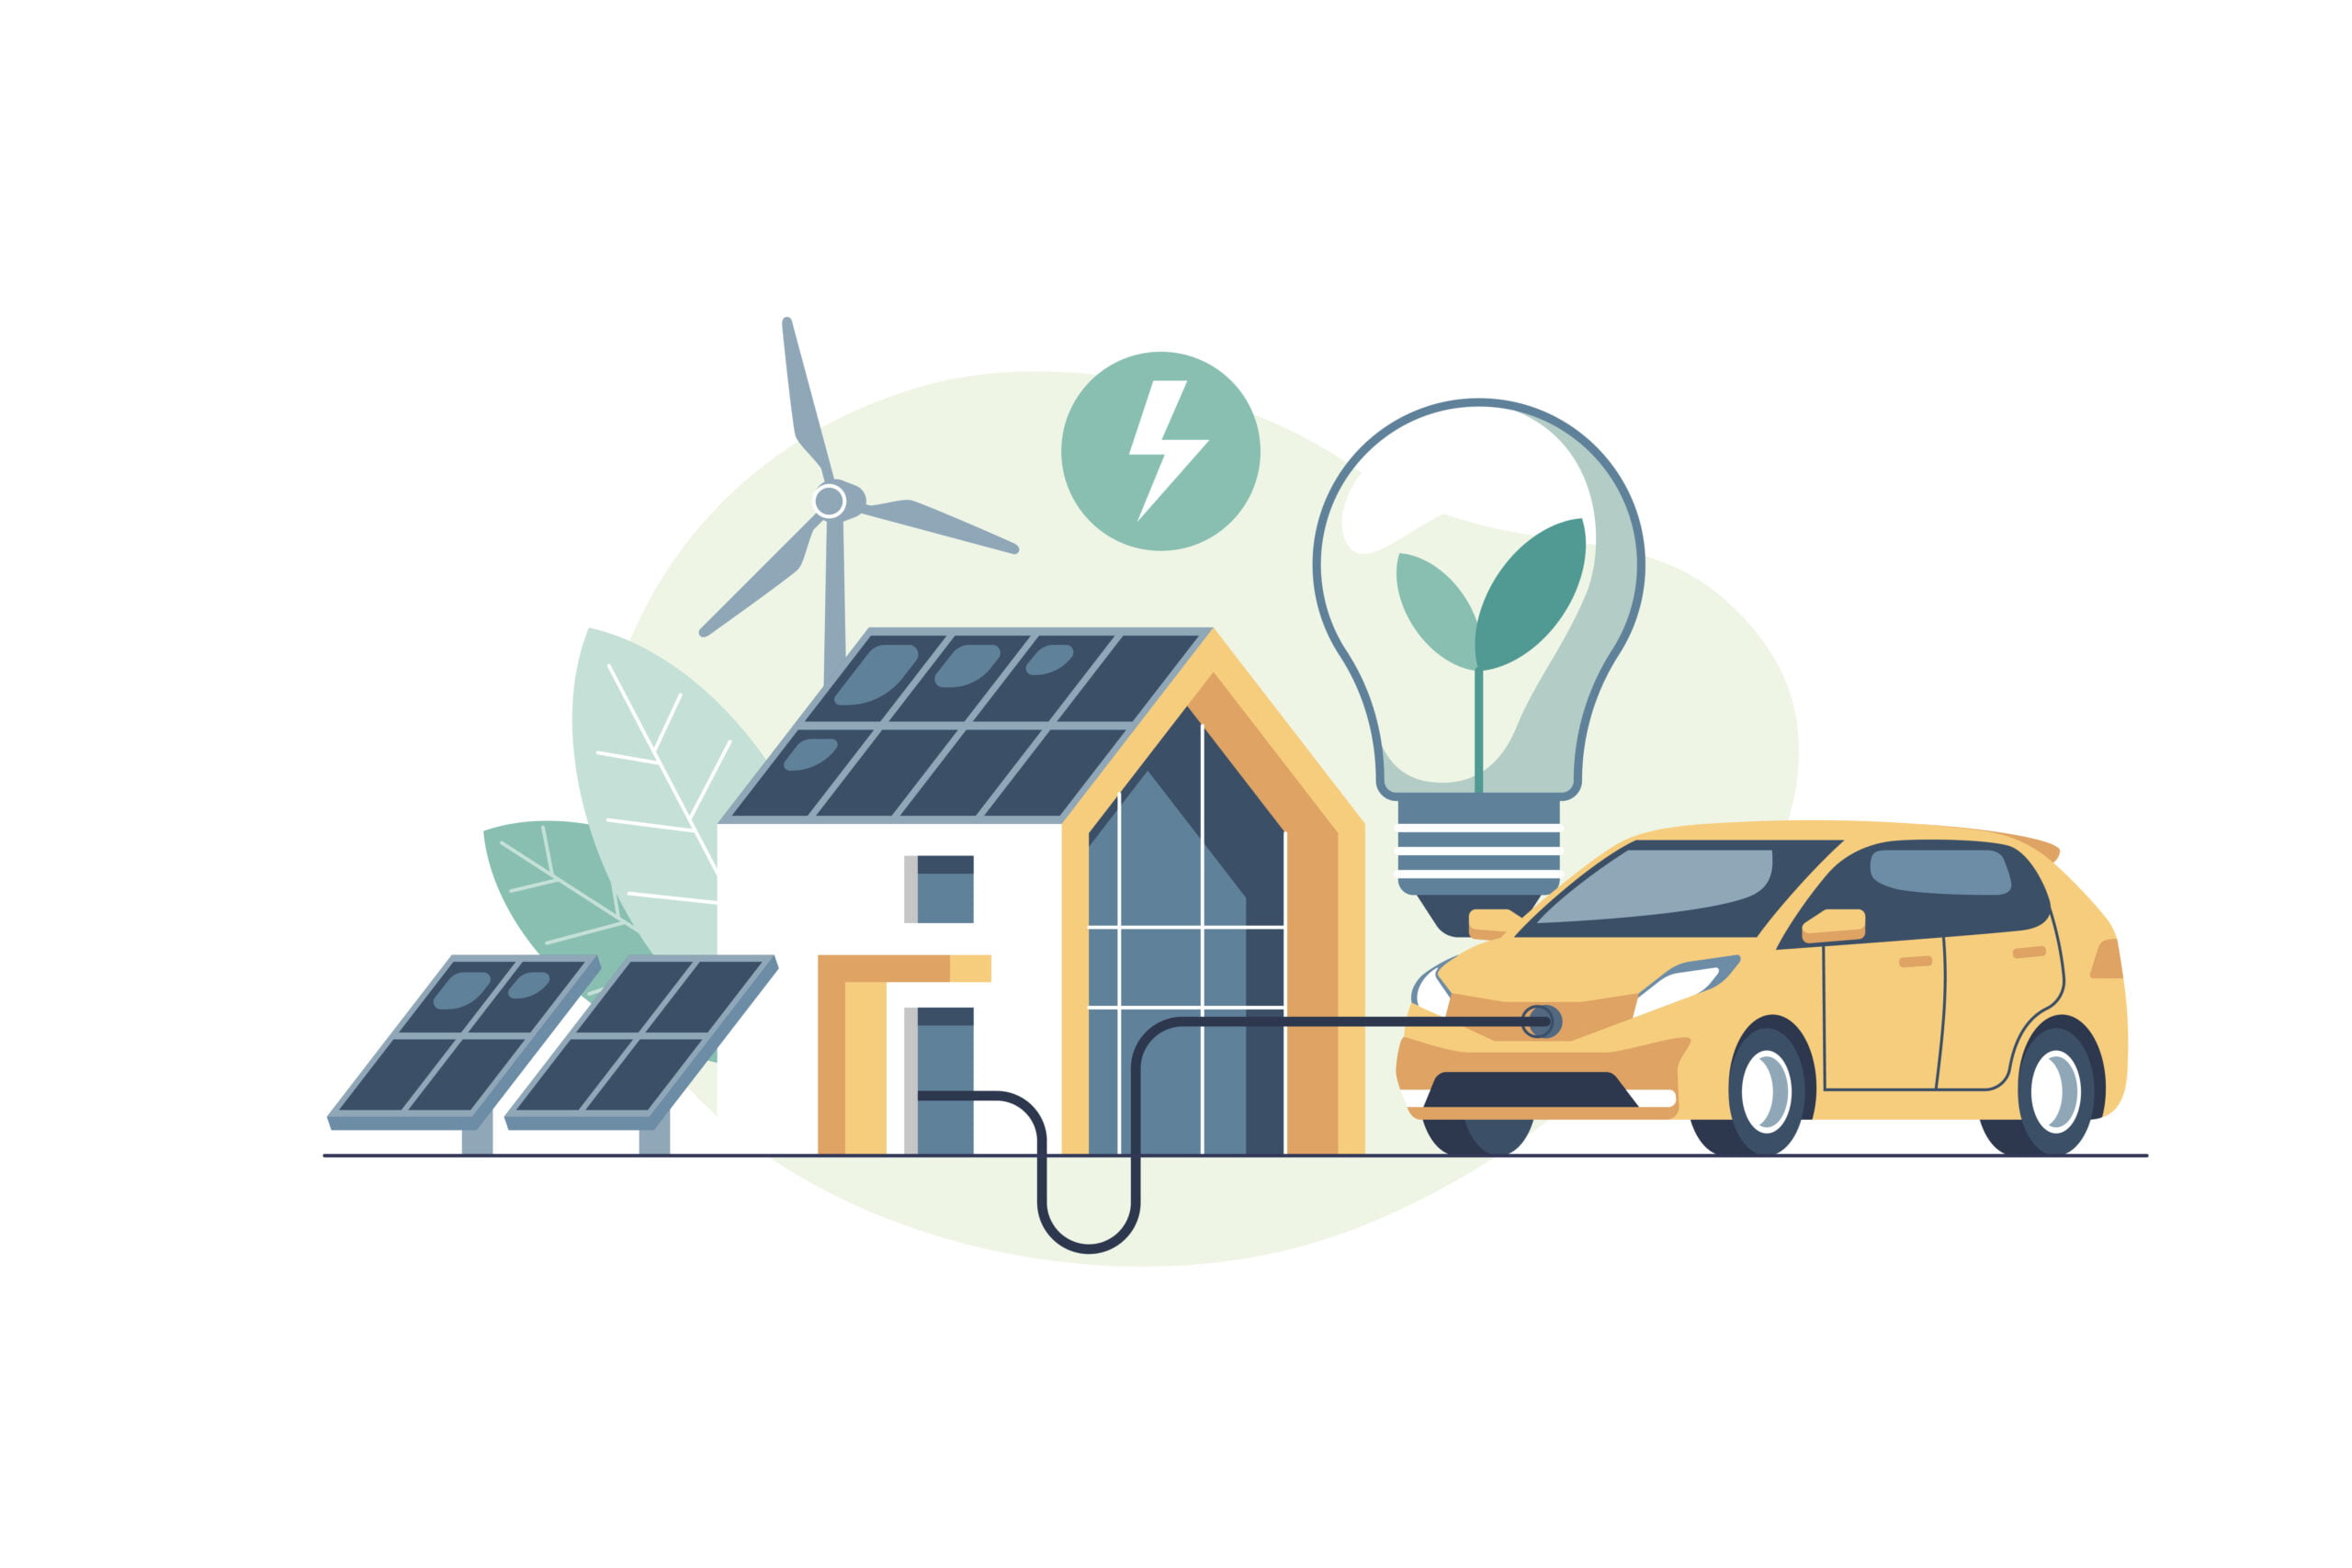 Concept of green energy illustration